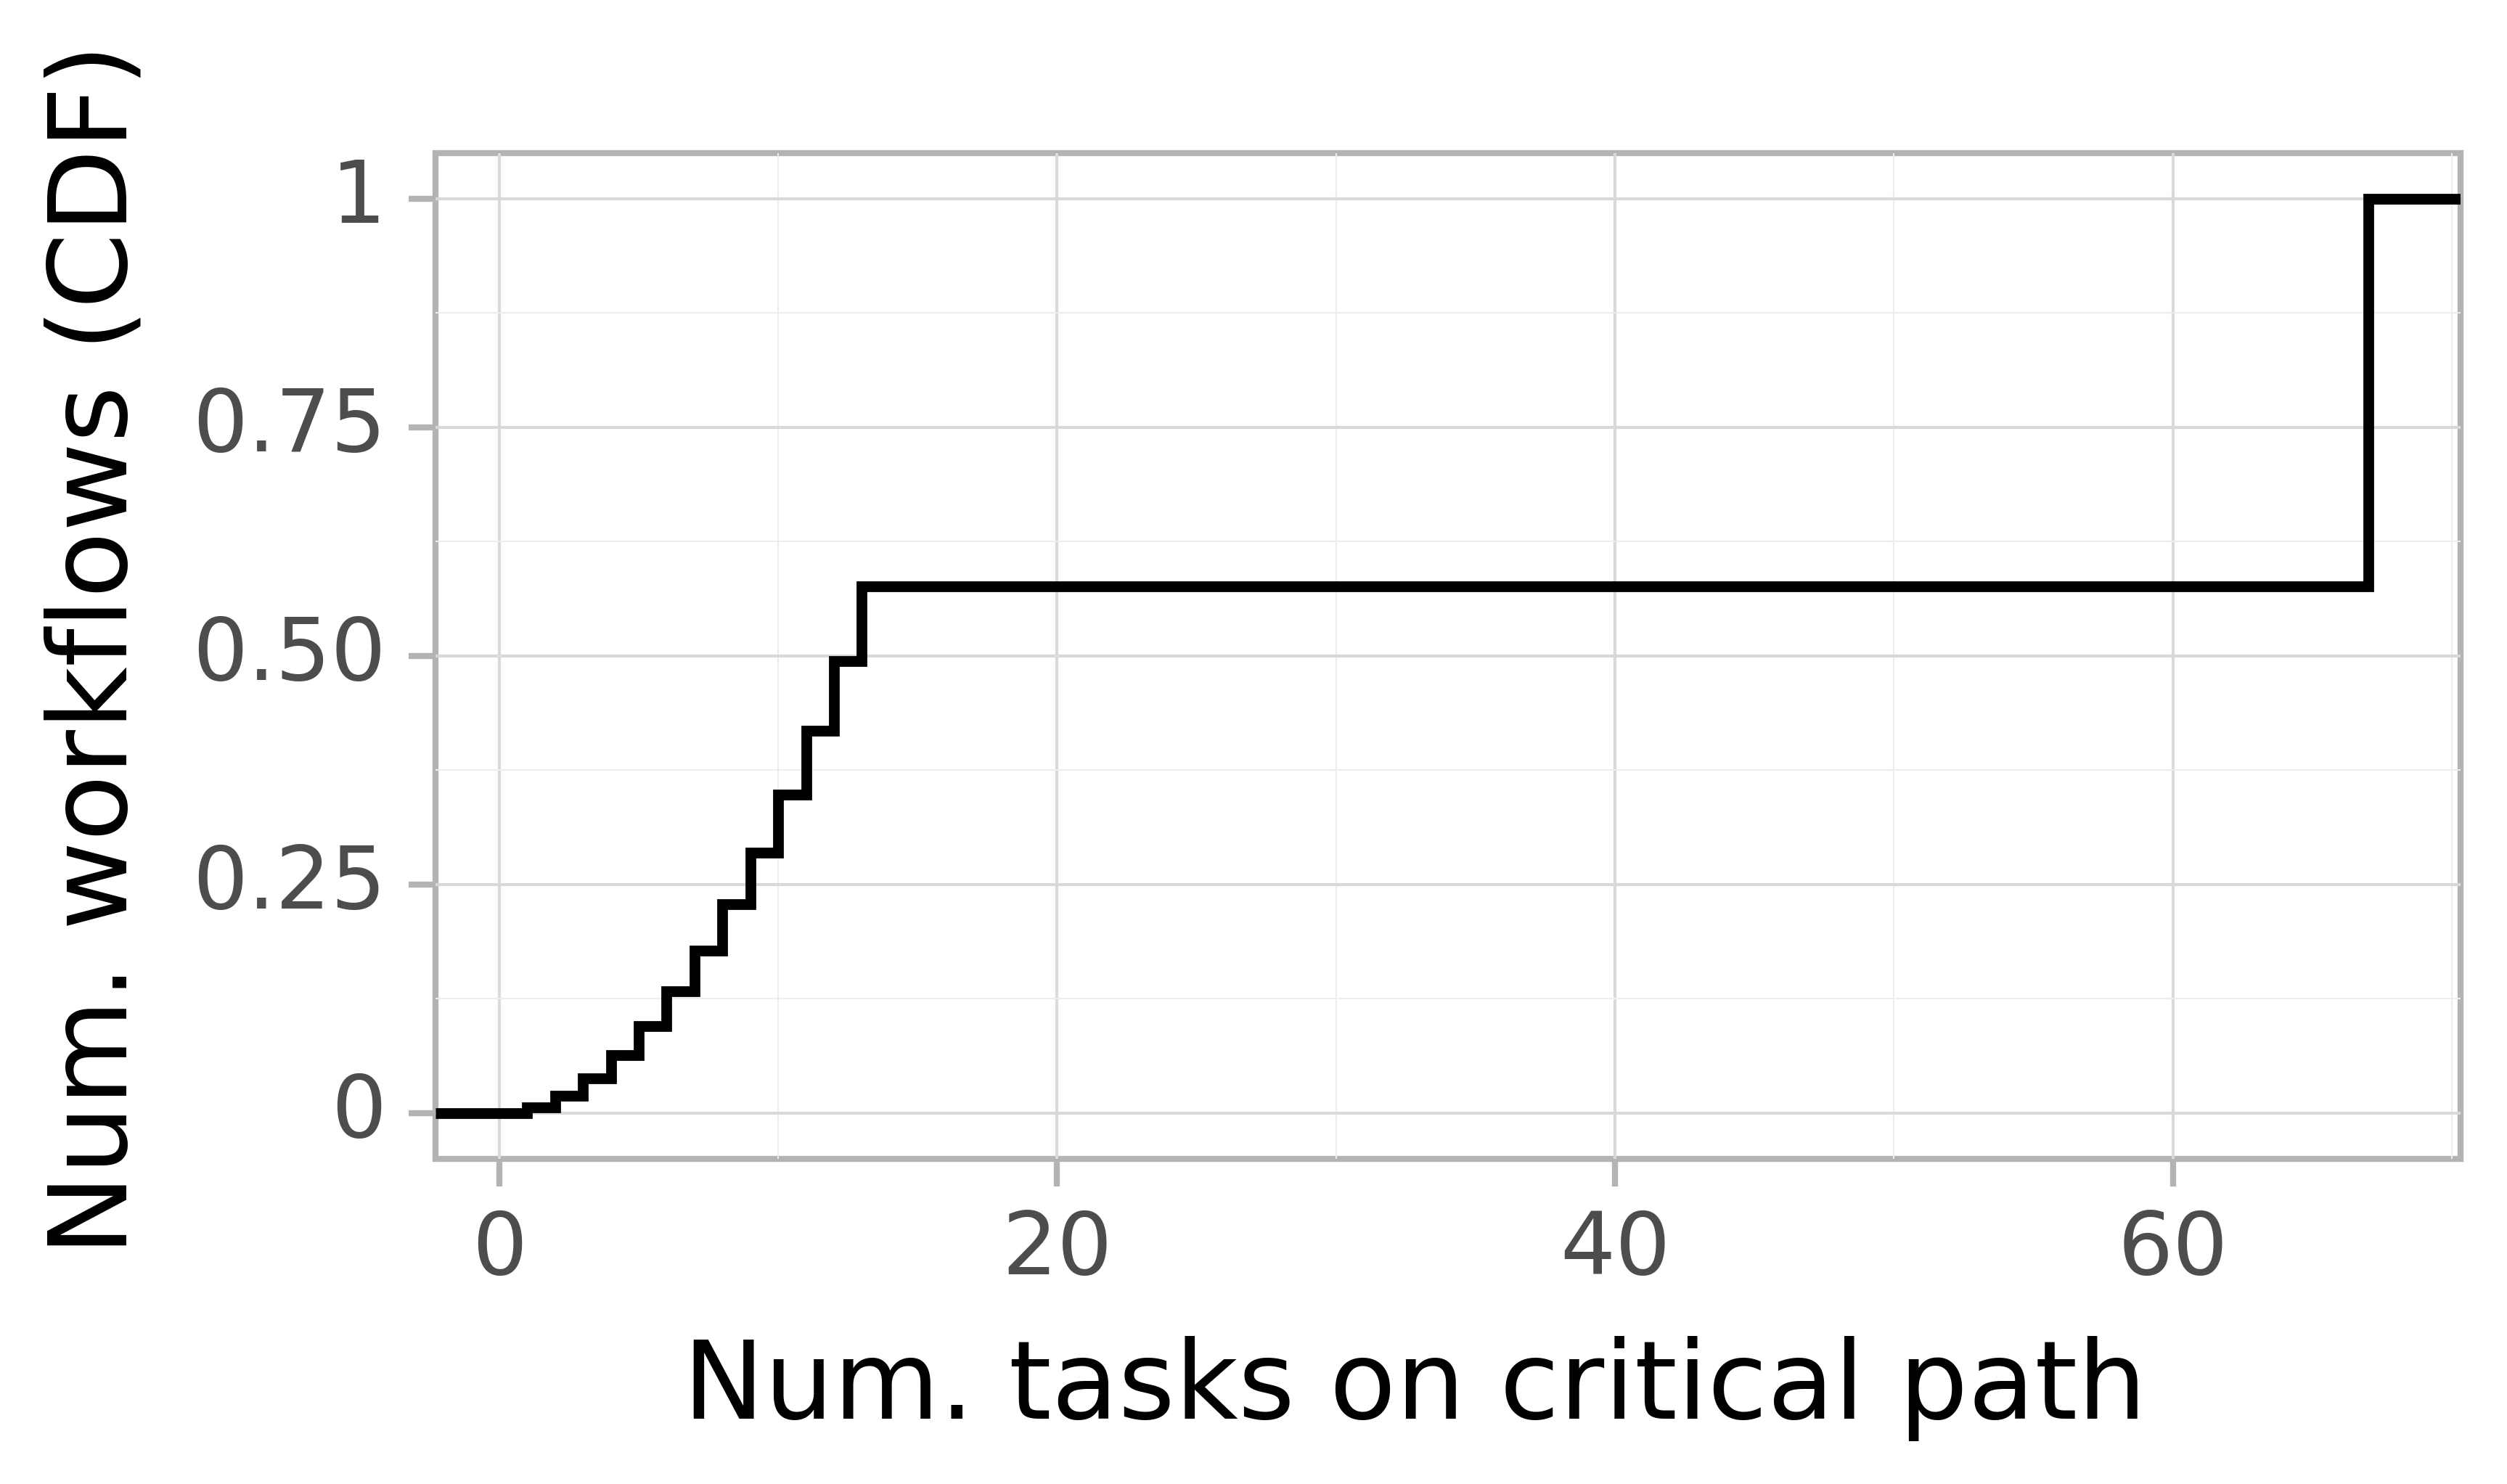 Job critical path task count graph for the alibaba2018 trace.